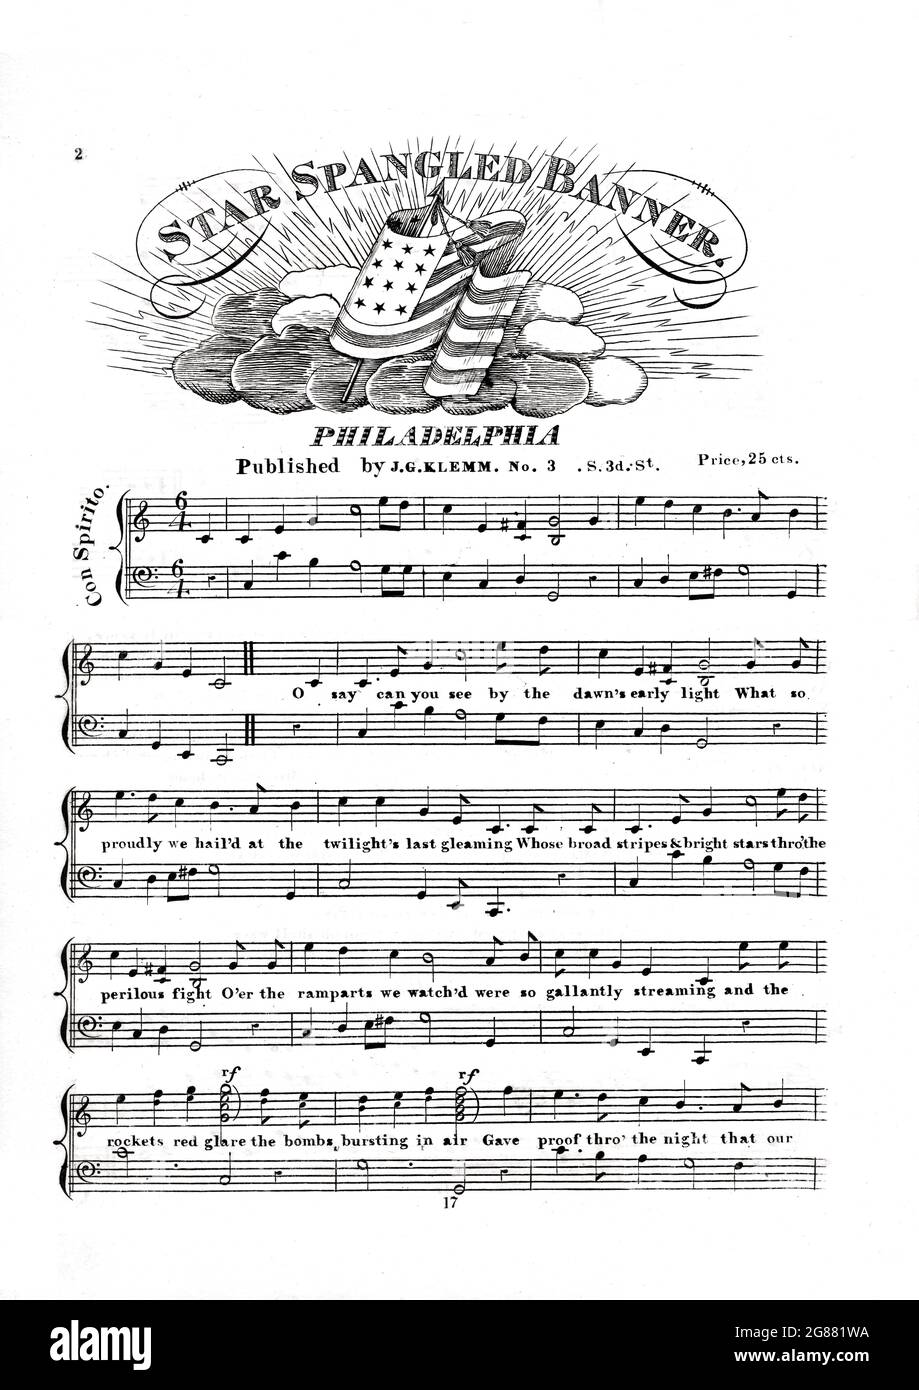 Star Spangled Banner, 1814 sheet music. 1st Illustrated music for our future national anthem during the War of 1812 by Francis Scott Key.. Stock Photo